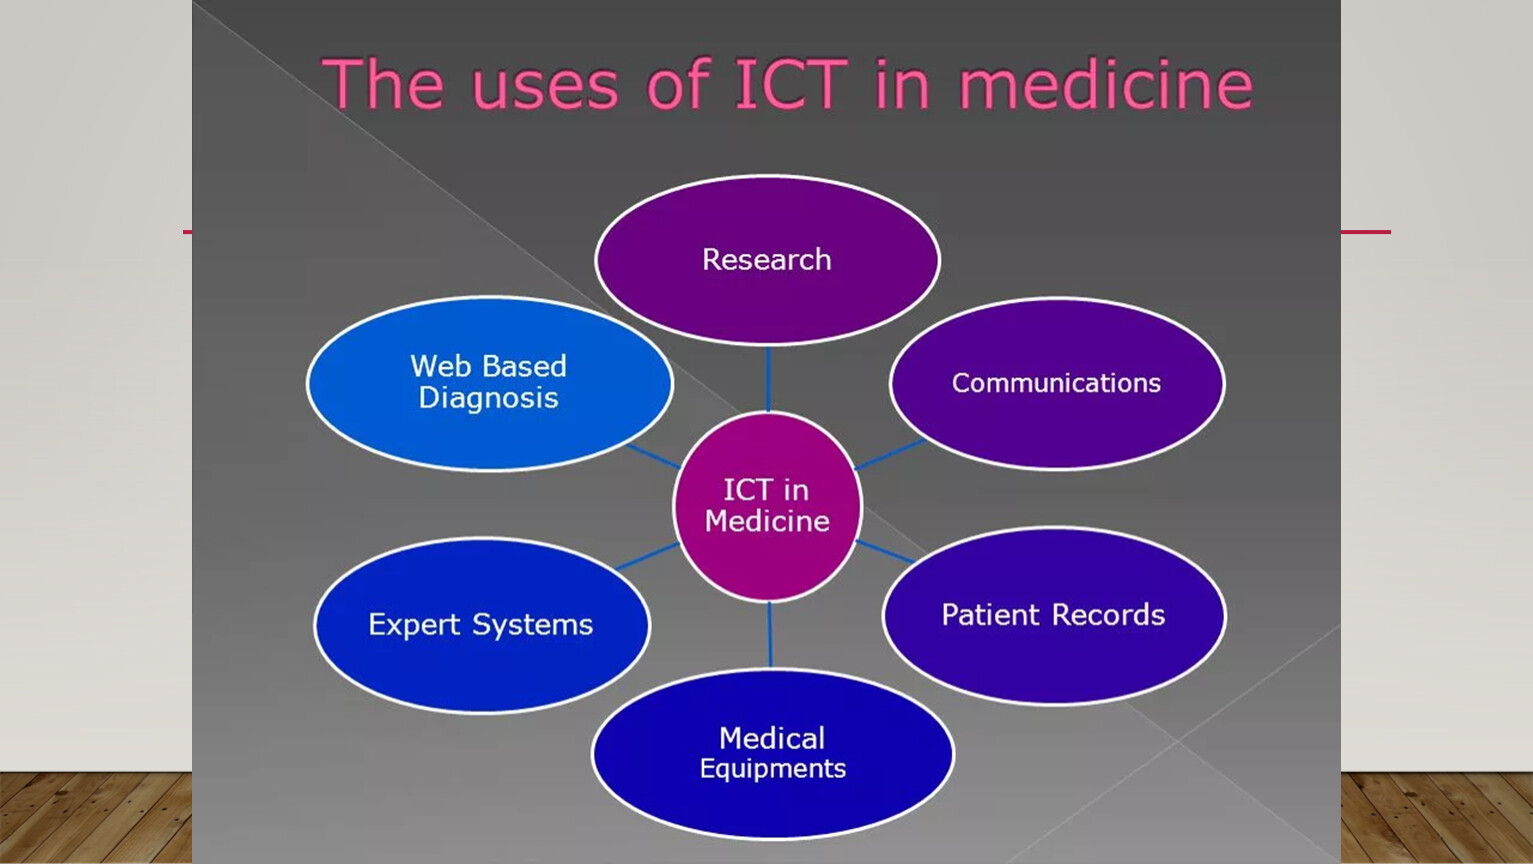 The role of technology. ICT Development презентация. ICT in Medicine. ICT Systems. Prospects of Development of ICT презентация.